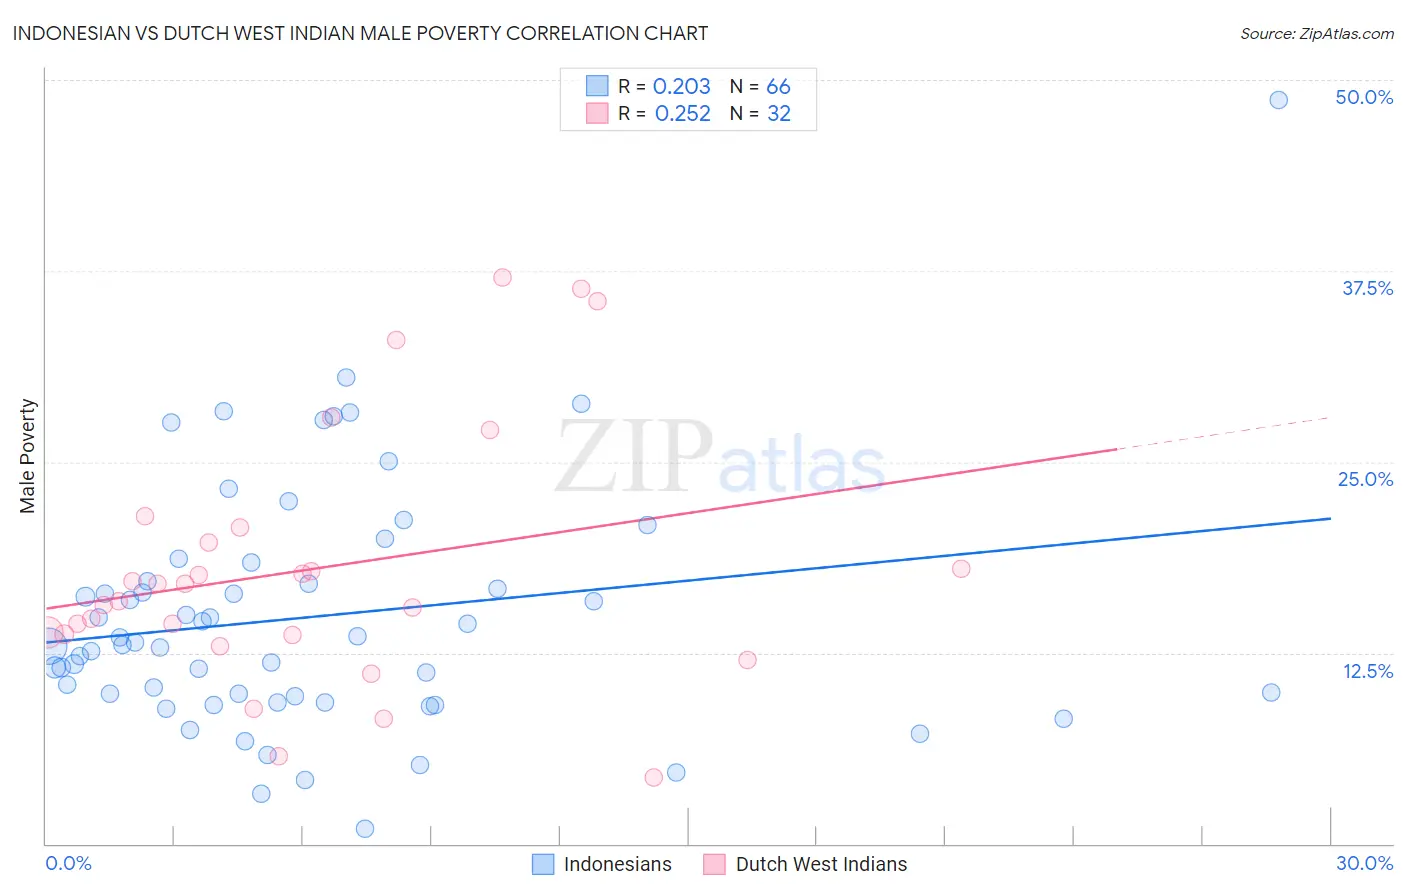 Indonesian vs Dutch West Indian Male Poverty